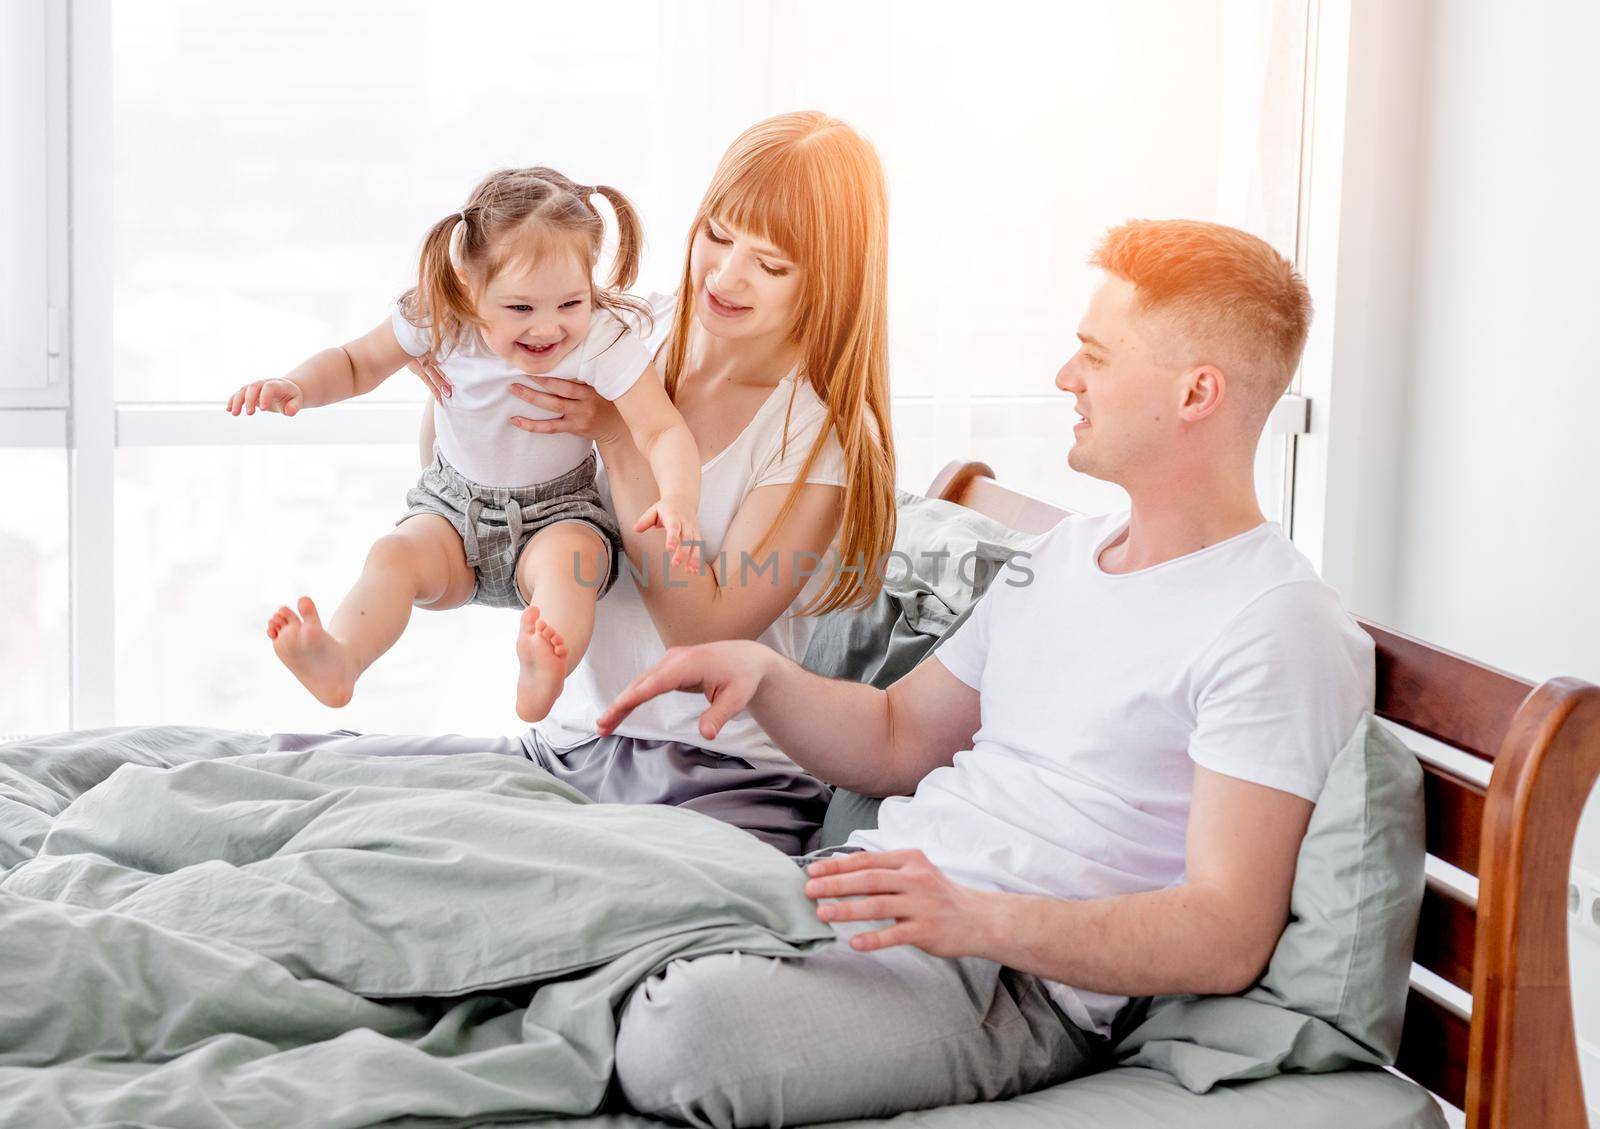 Sunny family mornents in the bedroom. Beautiful parents with their daughter staying in the bed and enjoying time together. Mother holding her smiling child in her hands